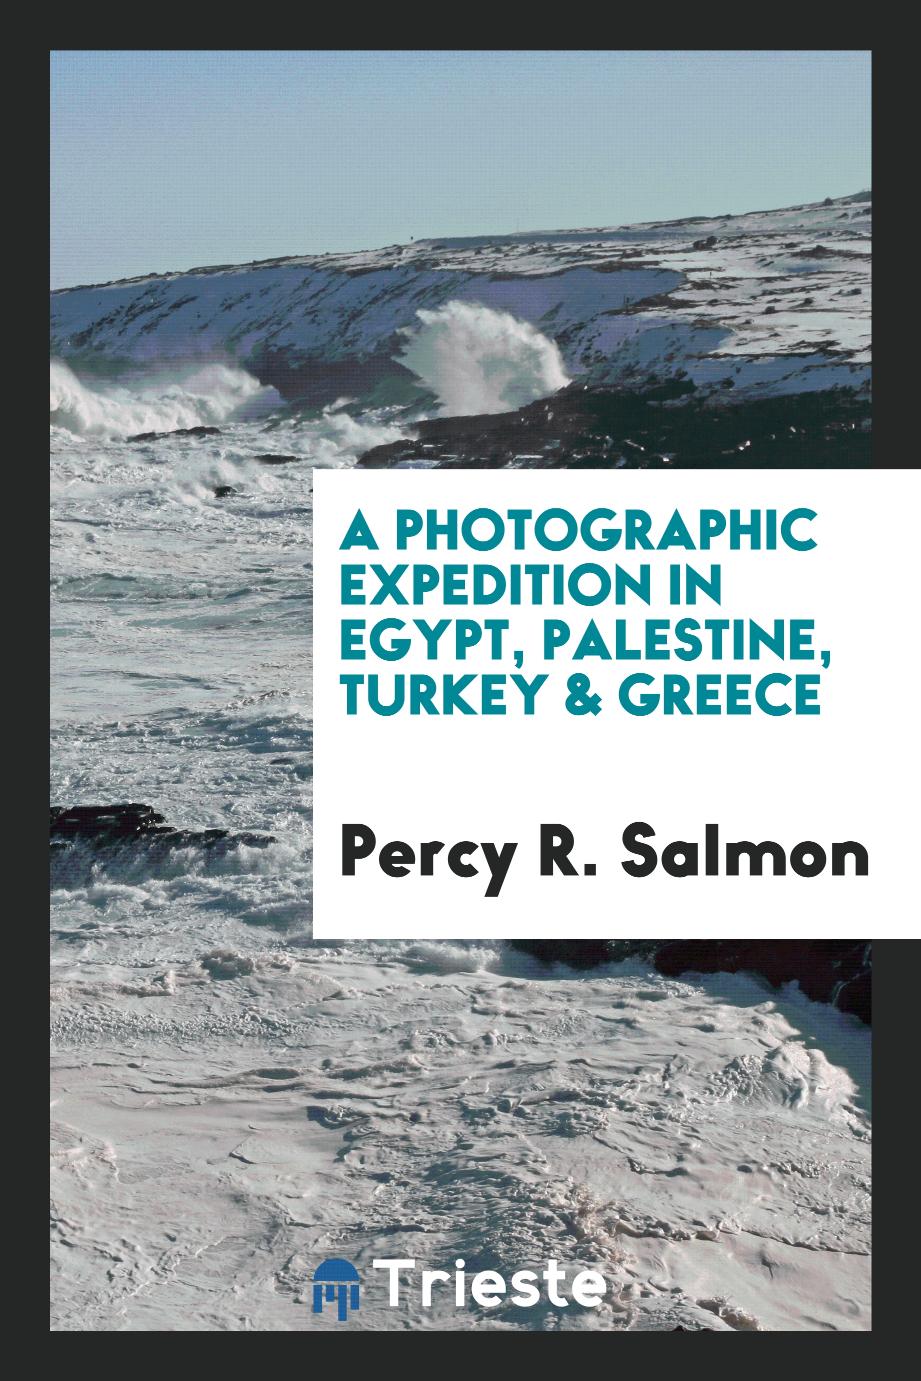 A Photographic Expedition in Egypt, Palestine, Turkey & Greece